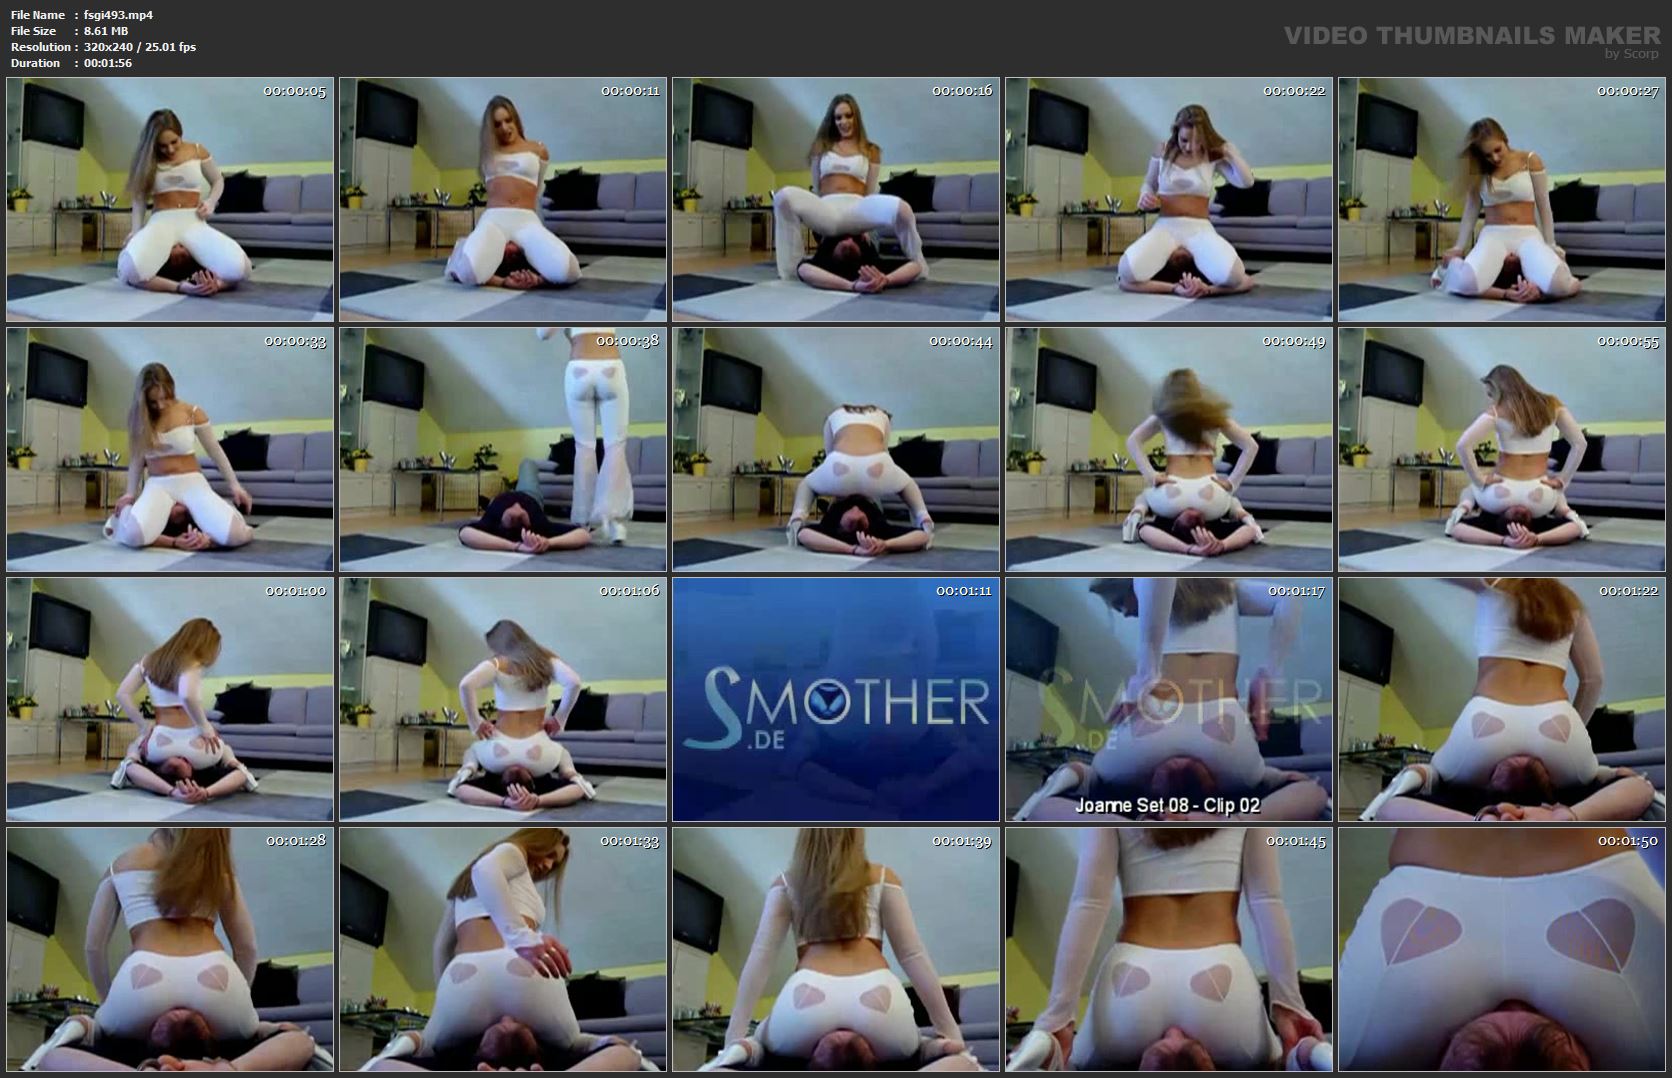 Experienced Joanne In Scene: Her Ass On His Face - FACESITTING GIRLS / SMOTHER DE - LQ/240p/MP4